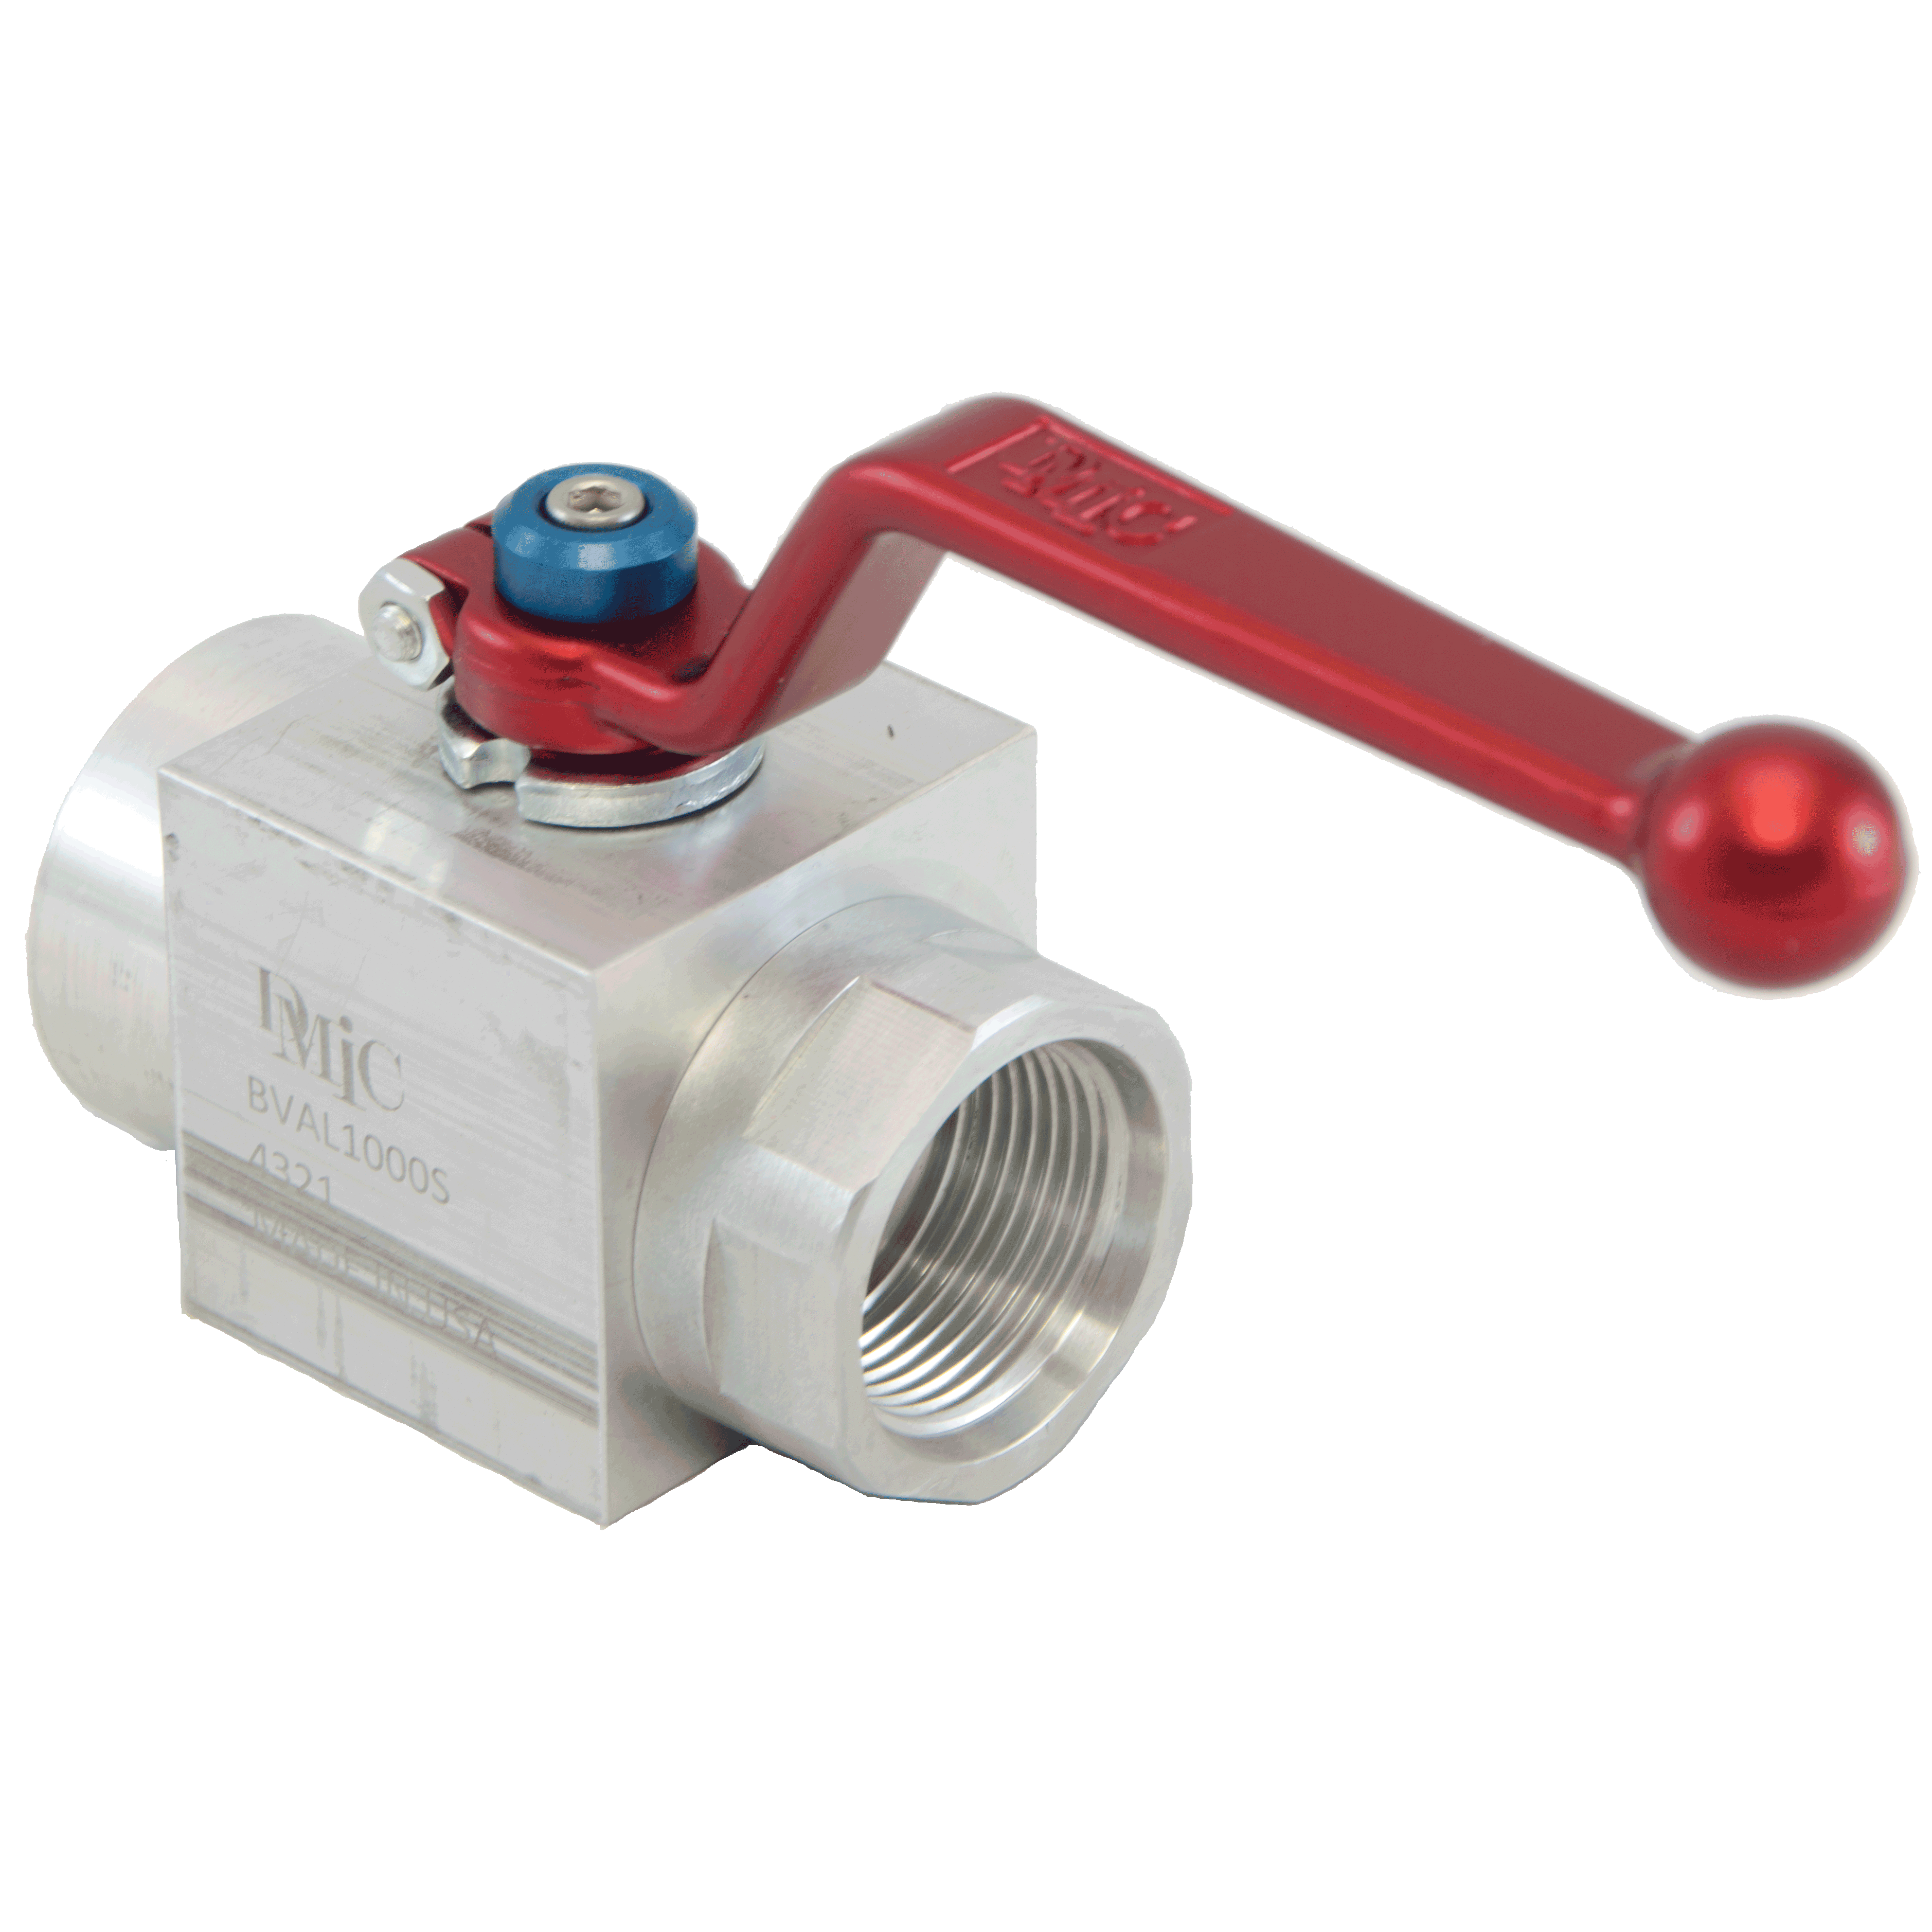 BVAL-0500N-4321-AZZN : DMIC Suction Ball Valve, 1/2 NPT, Aluminum, 600psi, Two-Way, with Locking Handle